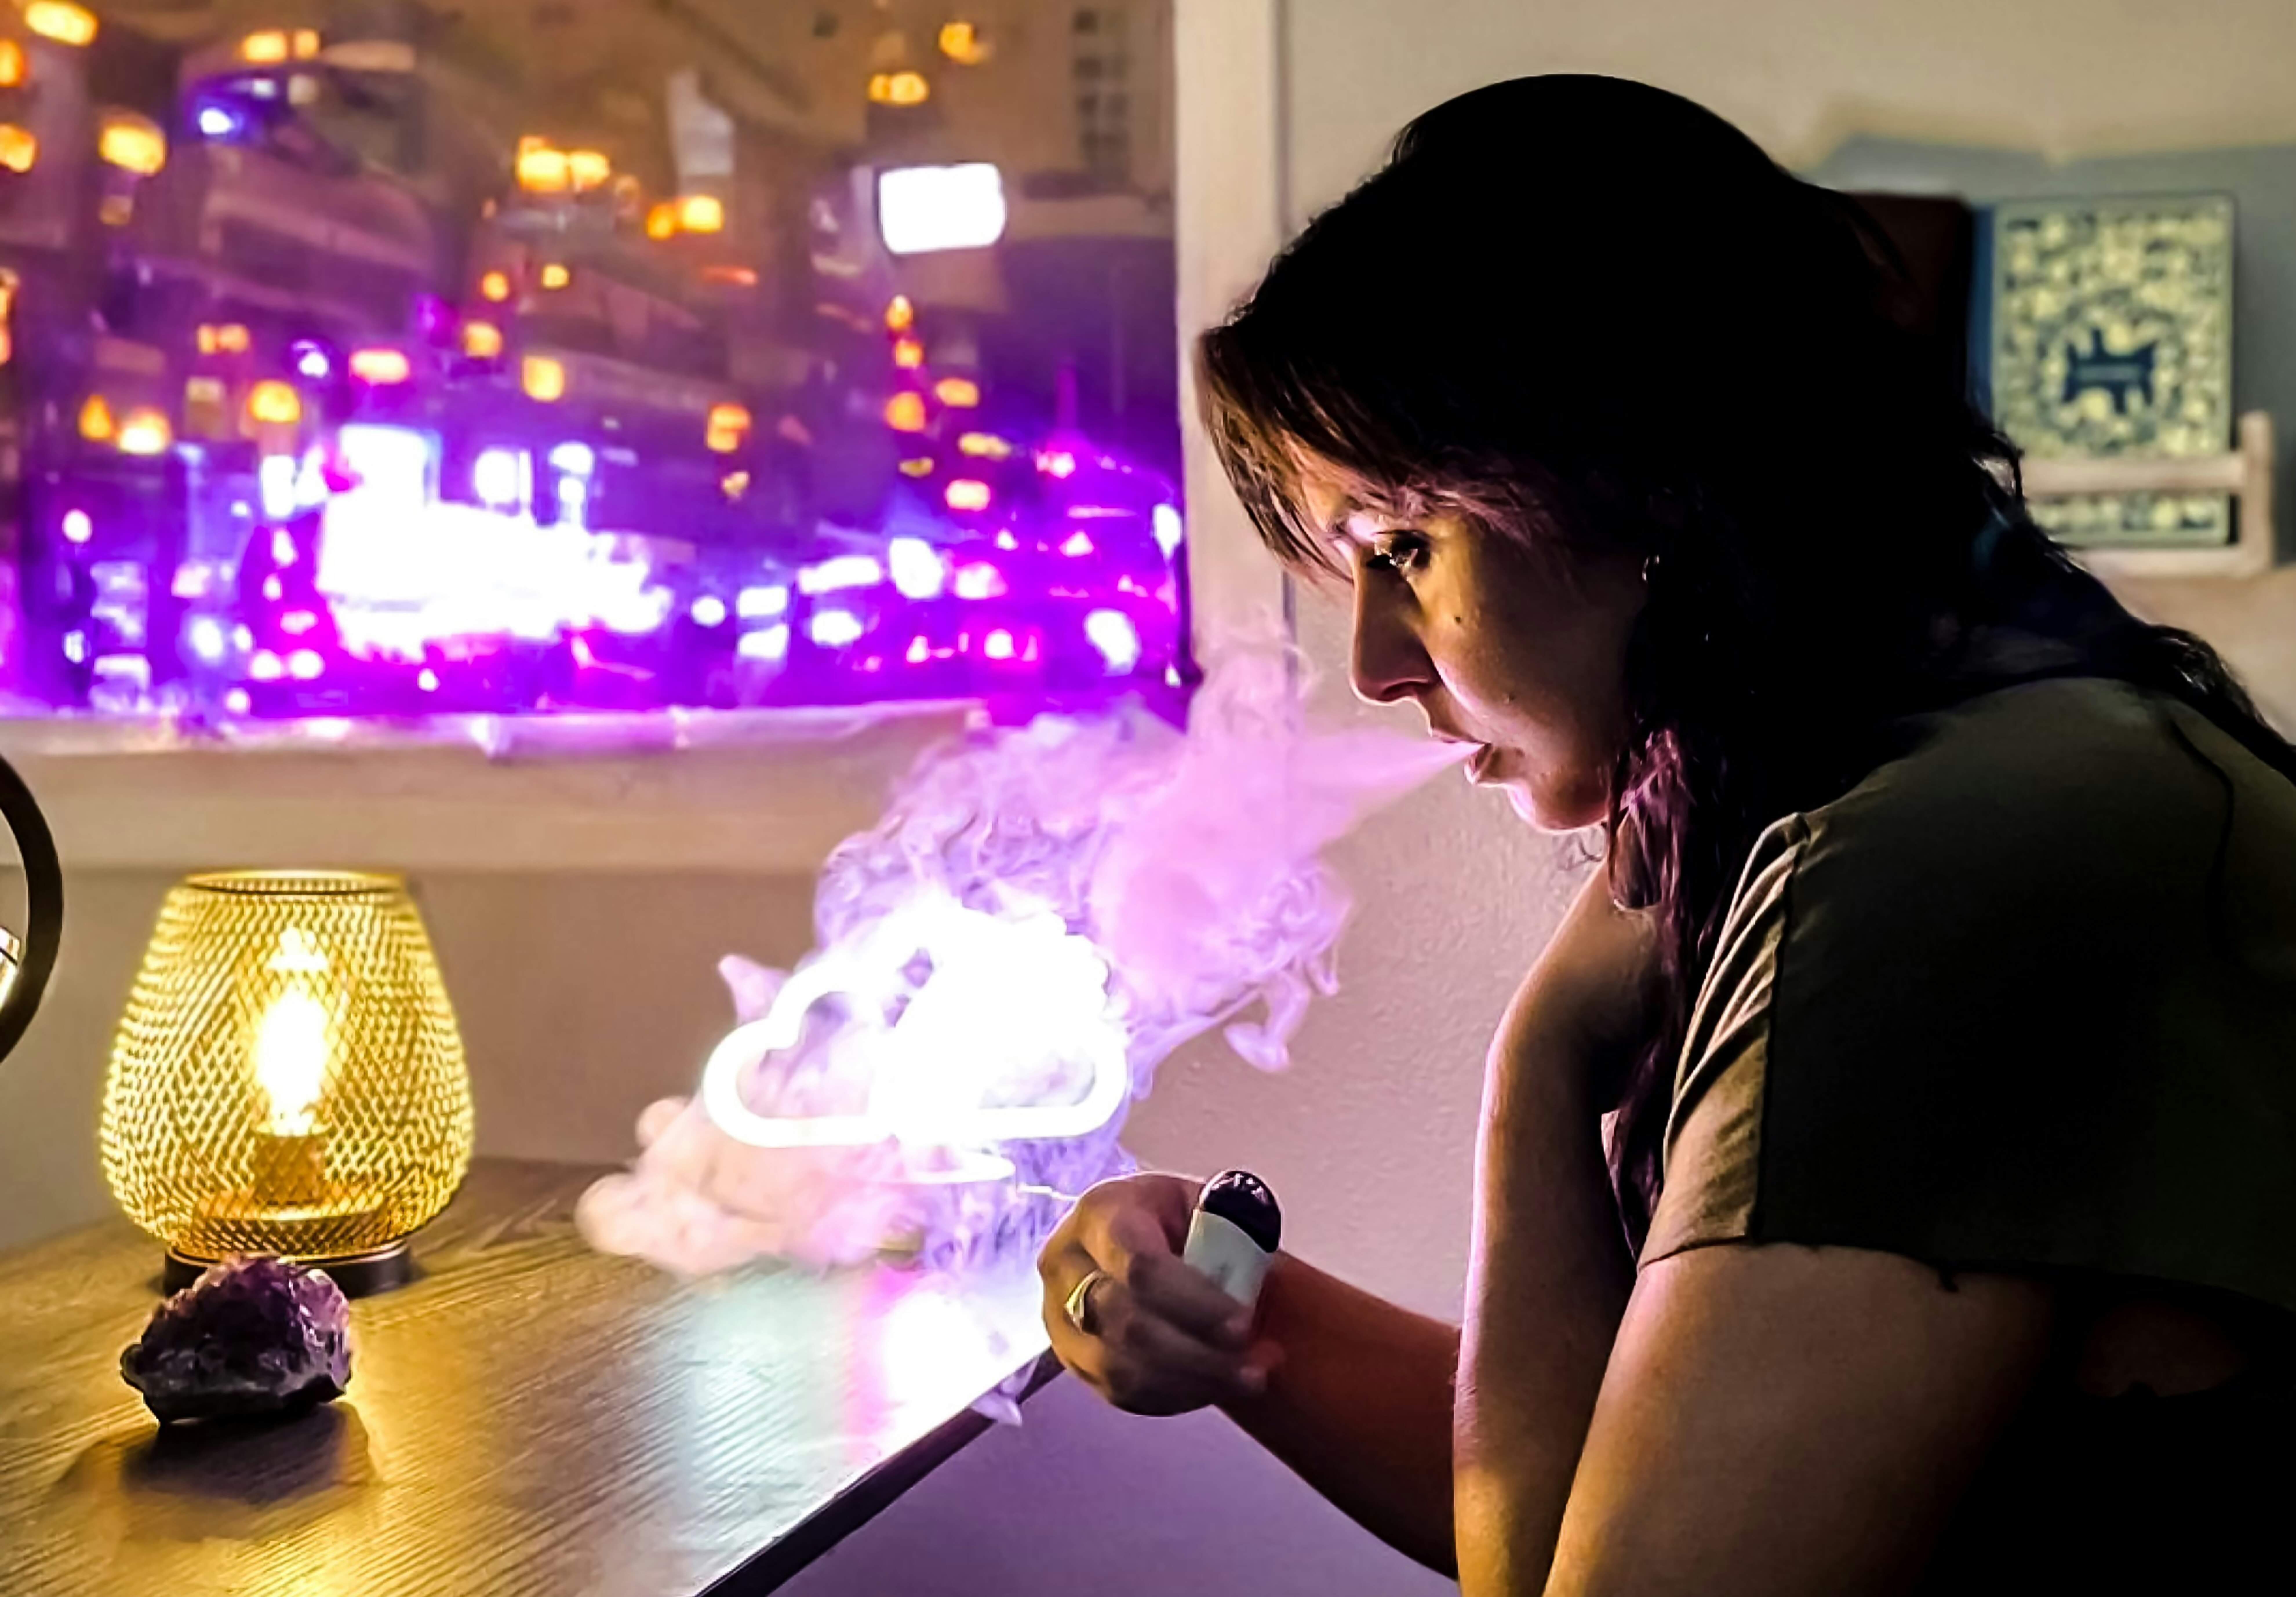 A woman sitting at a table and using a vaporizer